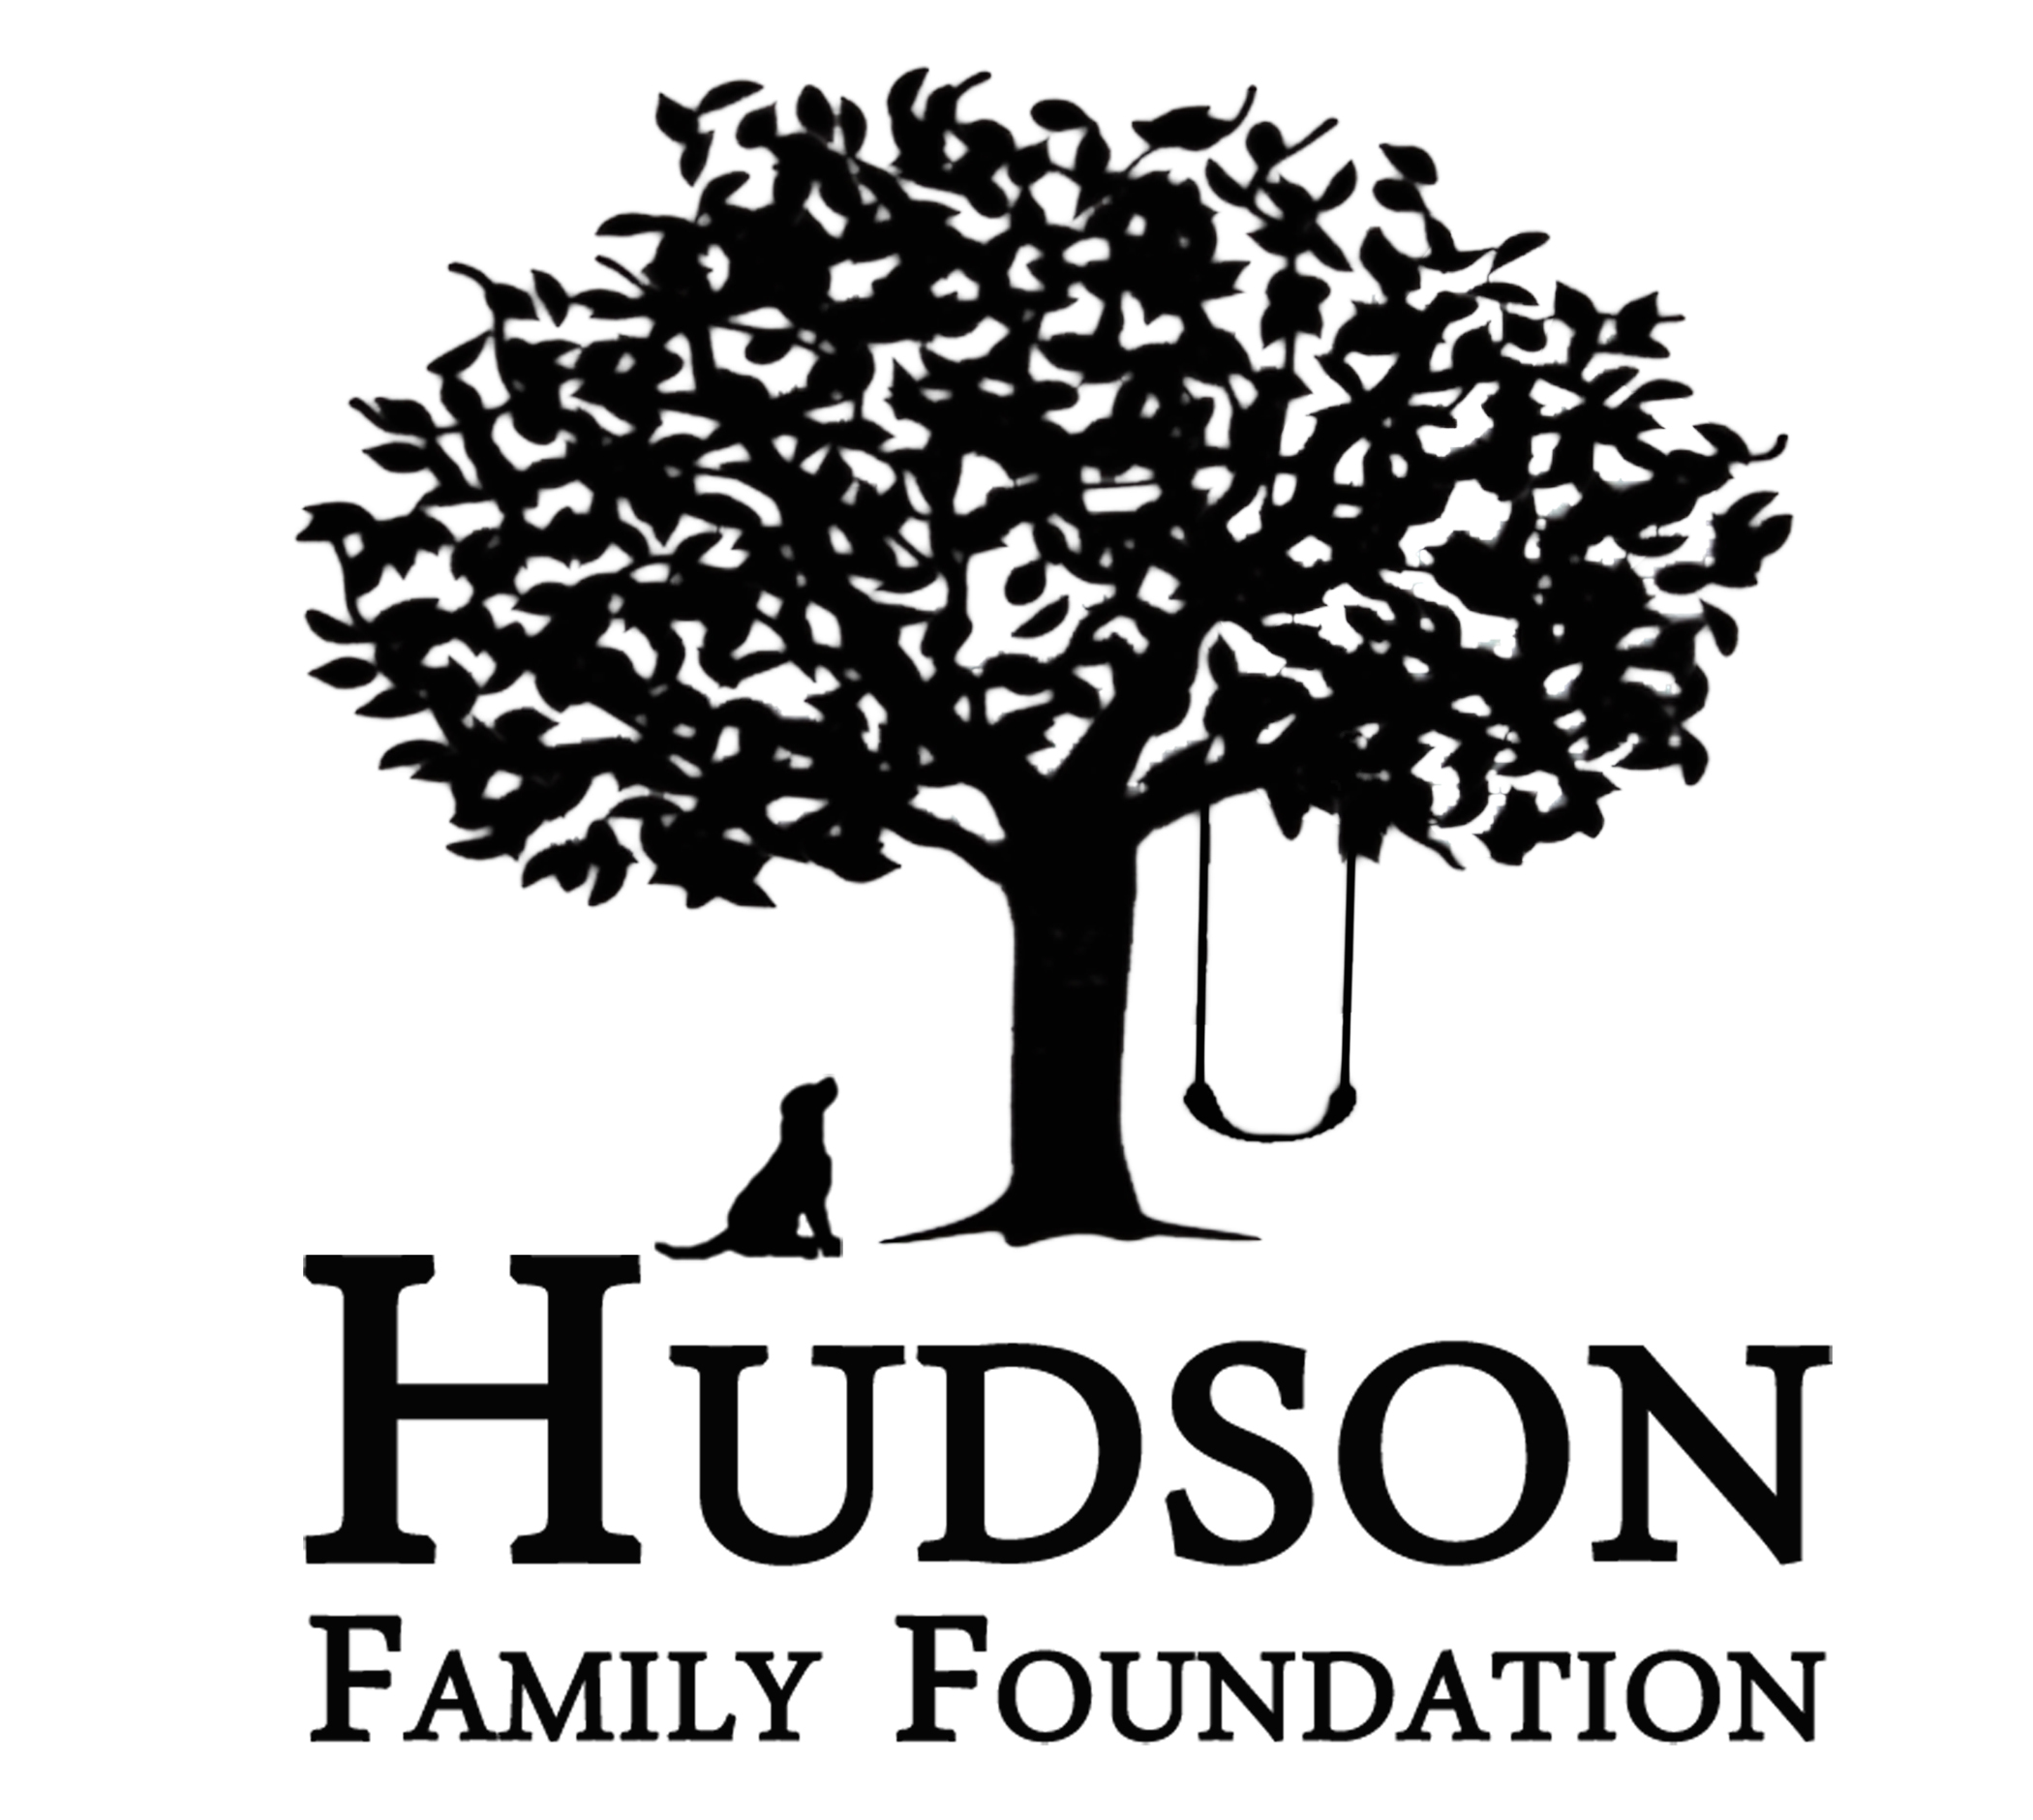 Hudsons help those in need with family foundation